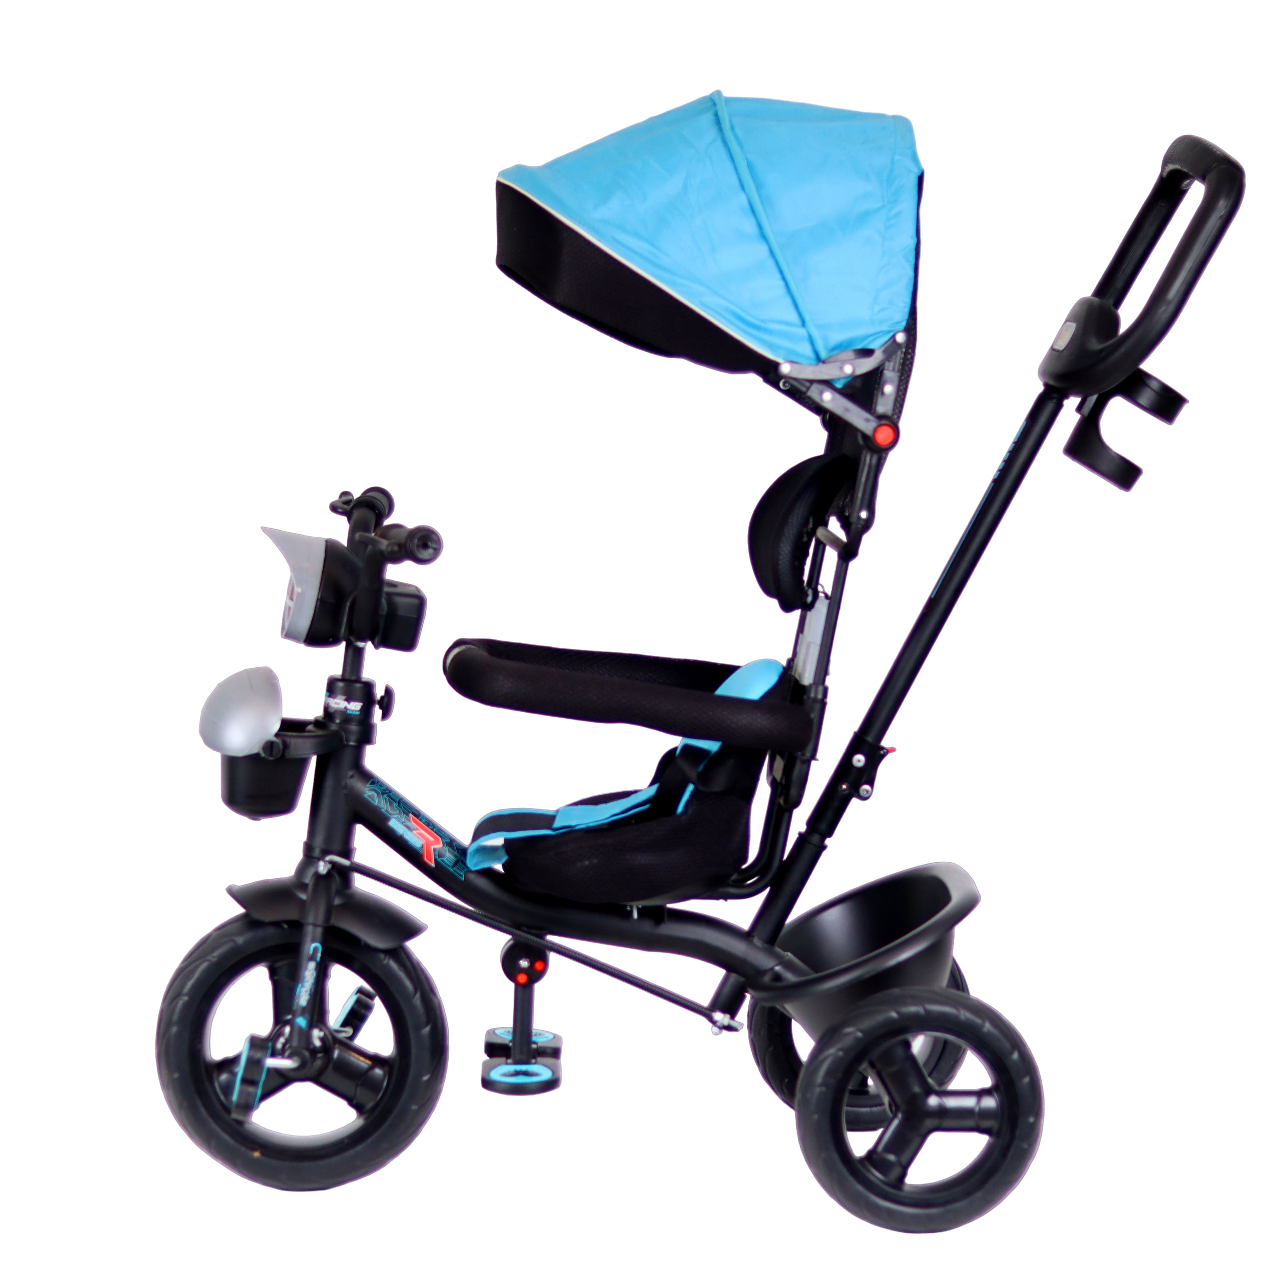 Luusa R9 Power 500 Tricycle for Kids with Hood and Parent Handle